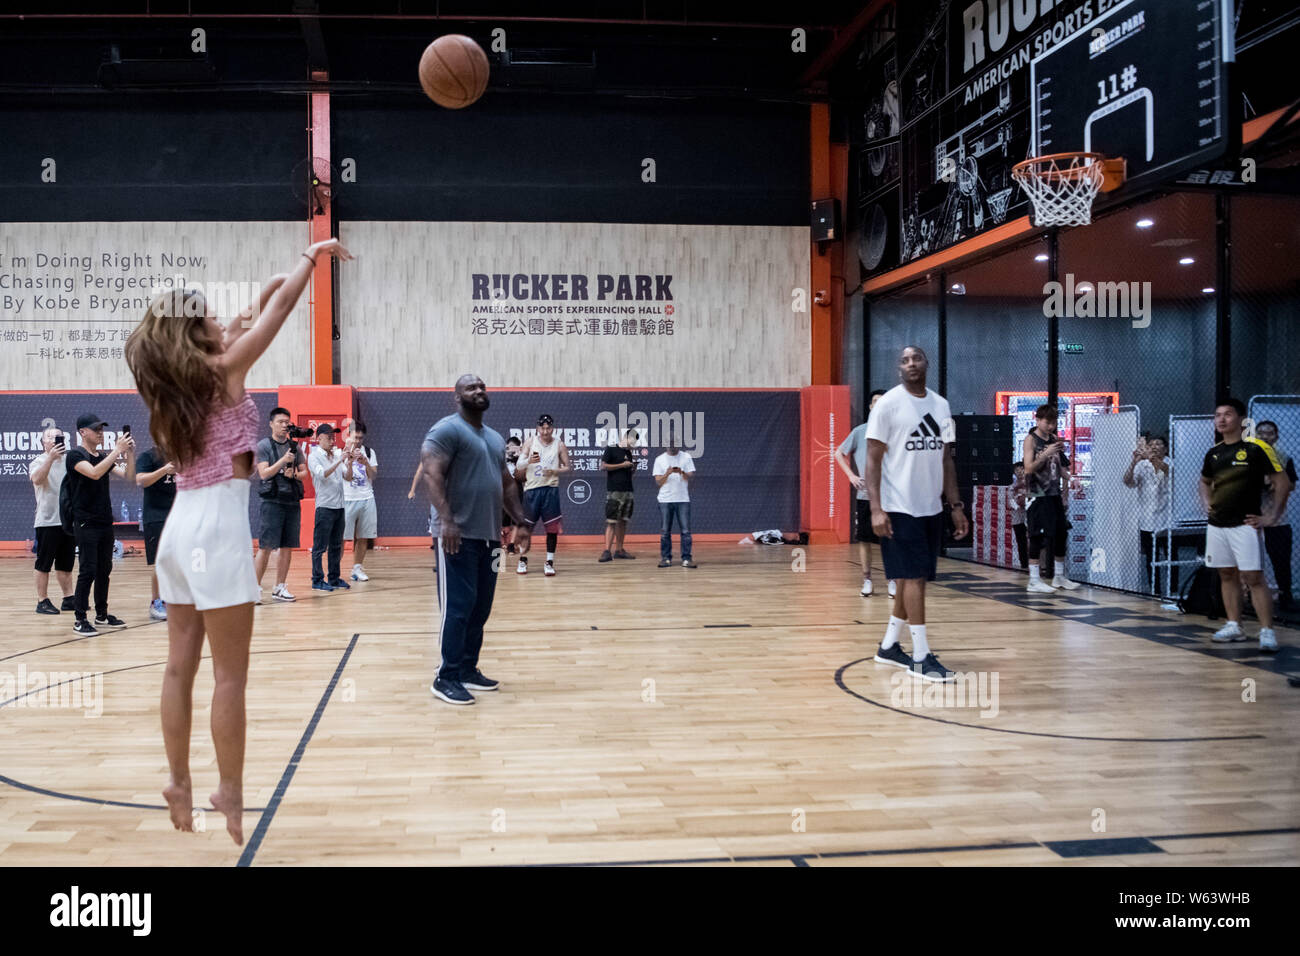 Former NBA star Tracy McGrady attends an activity at the Rucker Park in Shanghai, China, 13 September 2018. Stock Photo